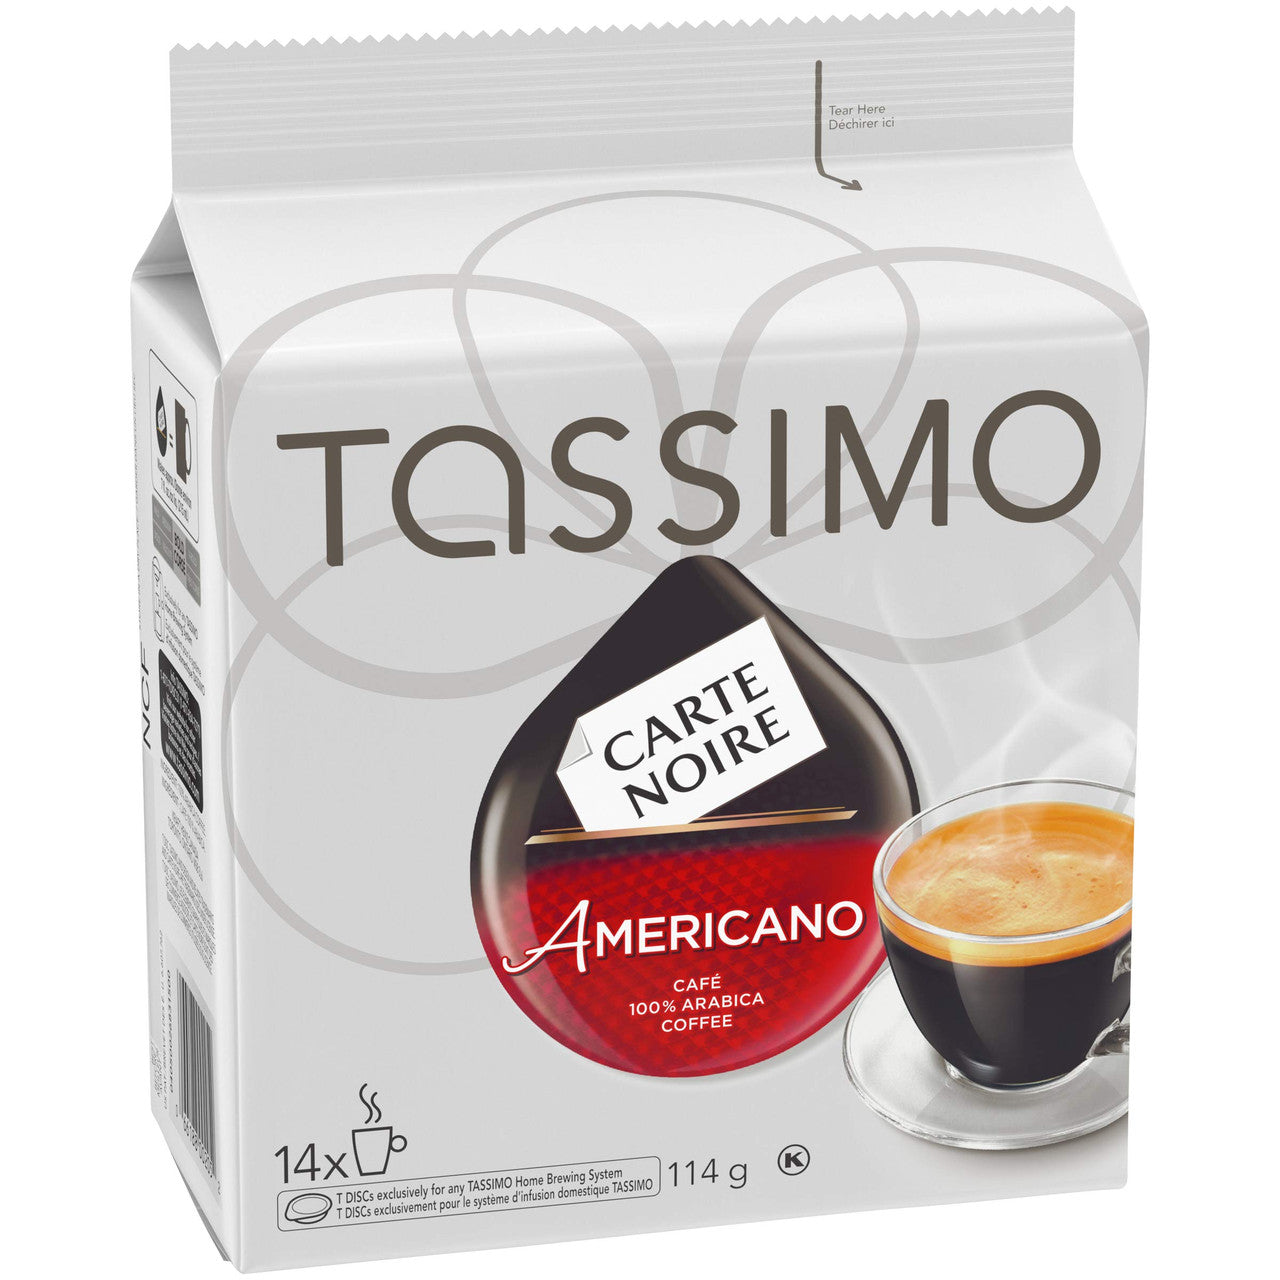 Tassimo Carte Noire Americano Coffee, 70 T-Discs (5 Boxes of 14 T-Discs) {Imported from Canada}